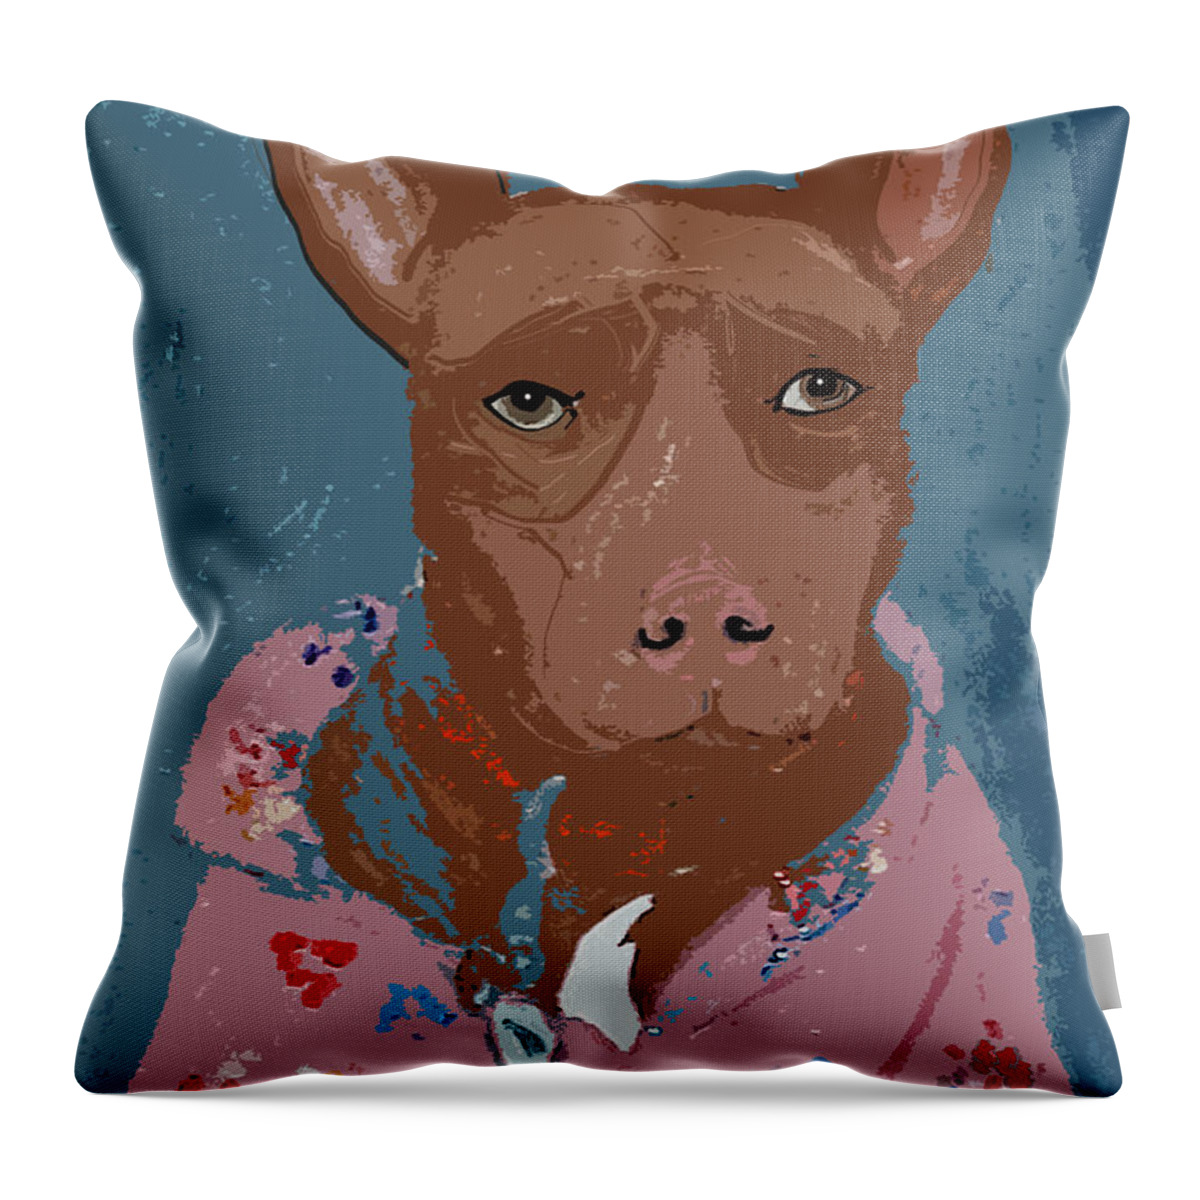 Pitt Bull Throw Pillow featuring the digital art Pitty in Pajamas by Ania M Milo